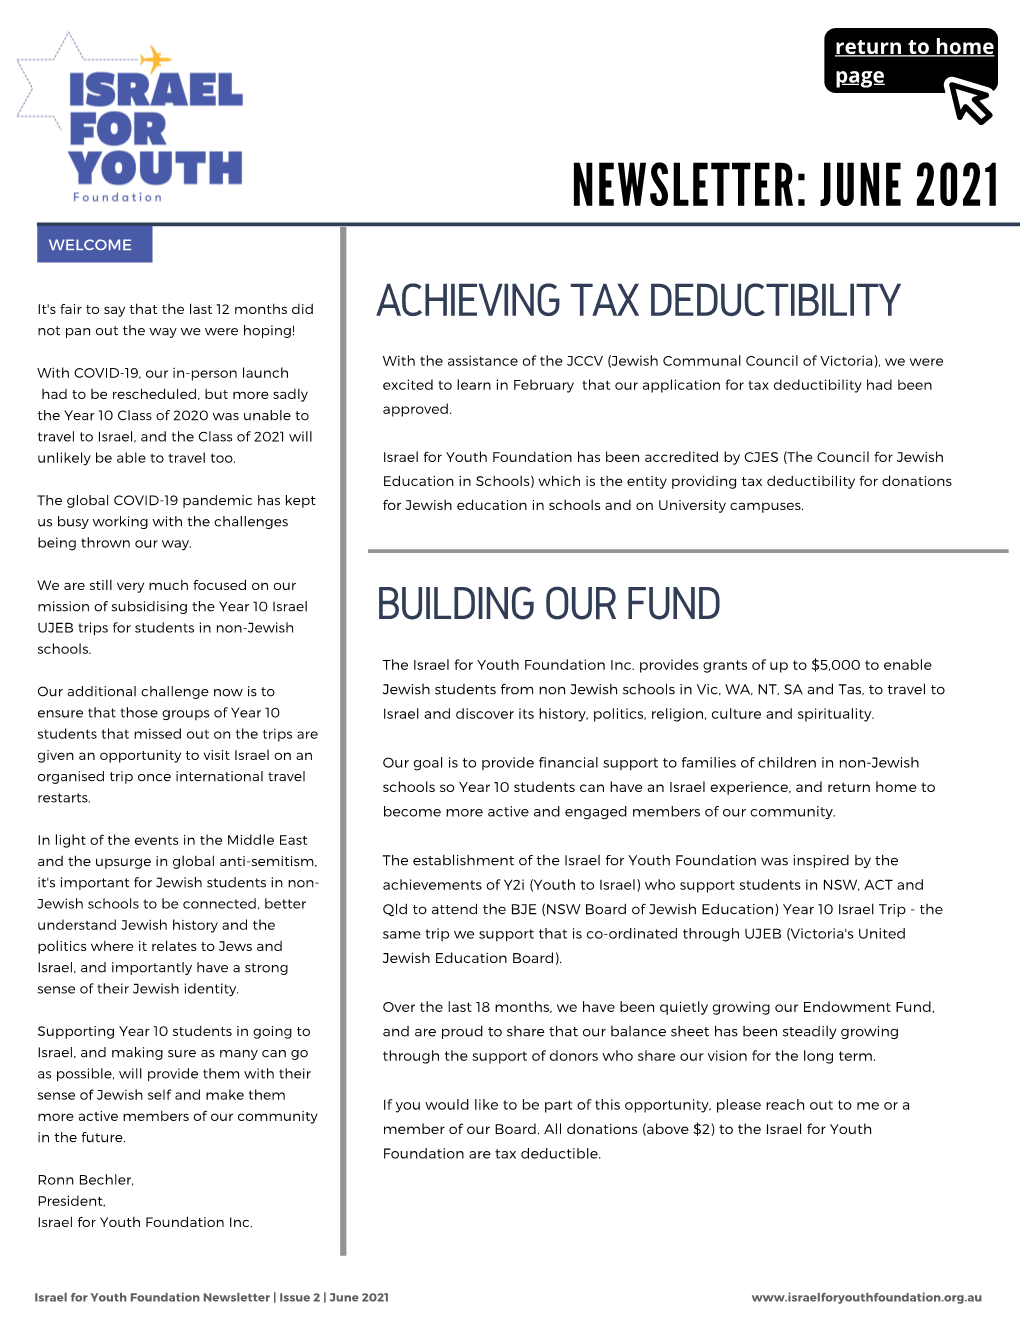 Israel for Youth Foundation Newsletter: Edition 2